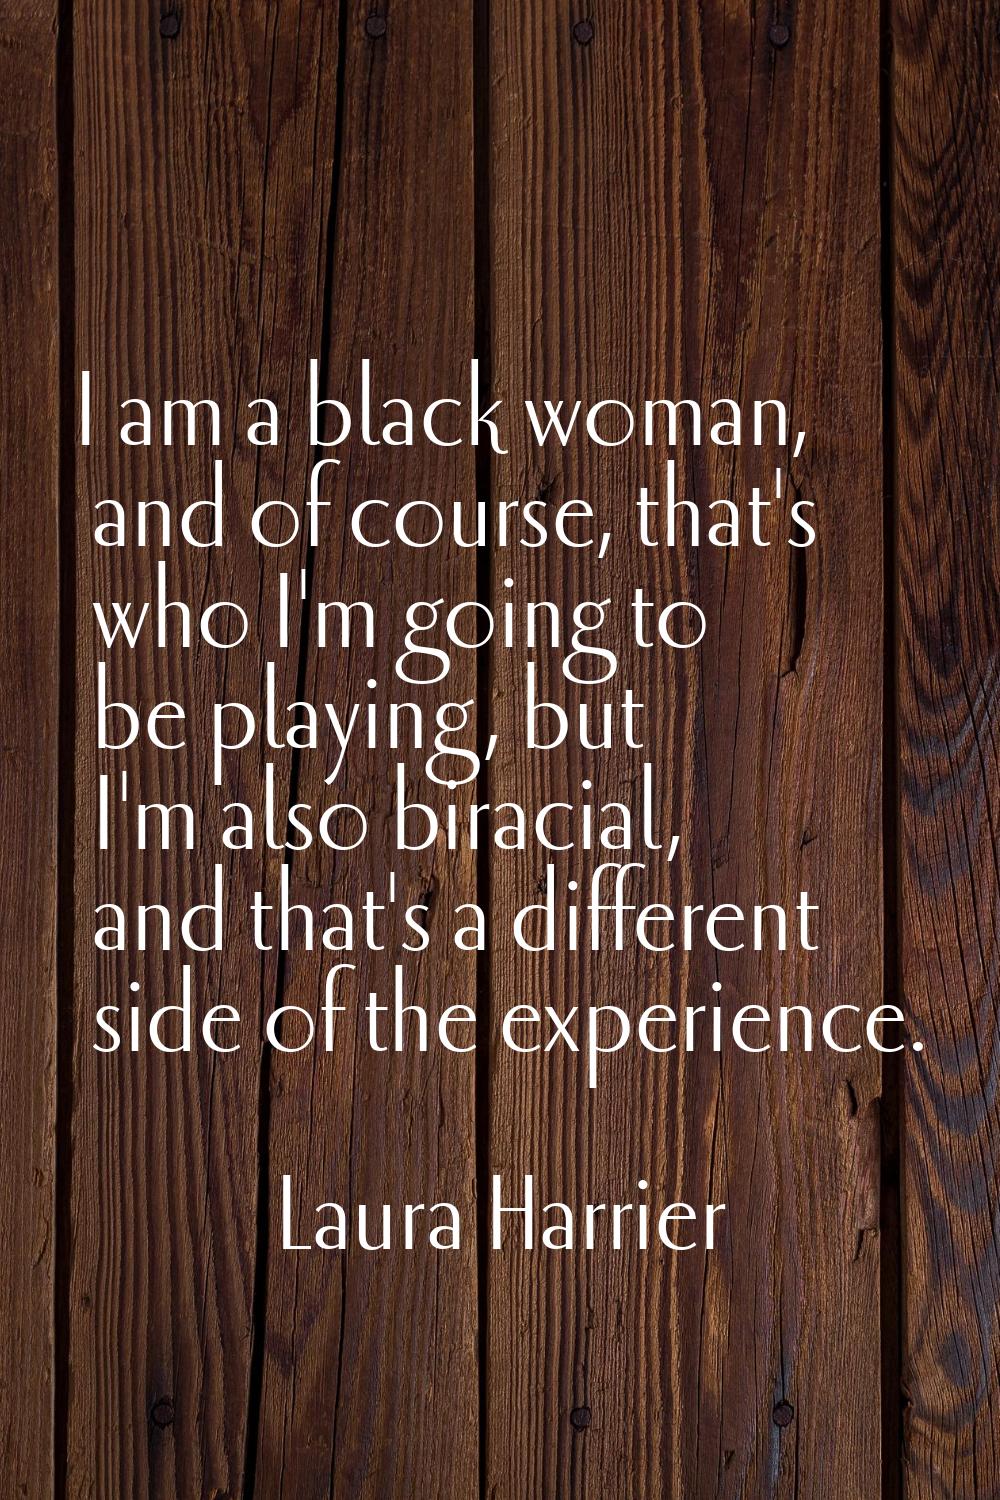 I am a black woman, and of course, that's who I'm going to be playing, but I'm also biracial, and t